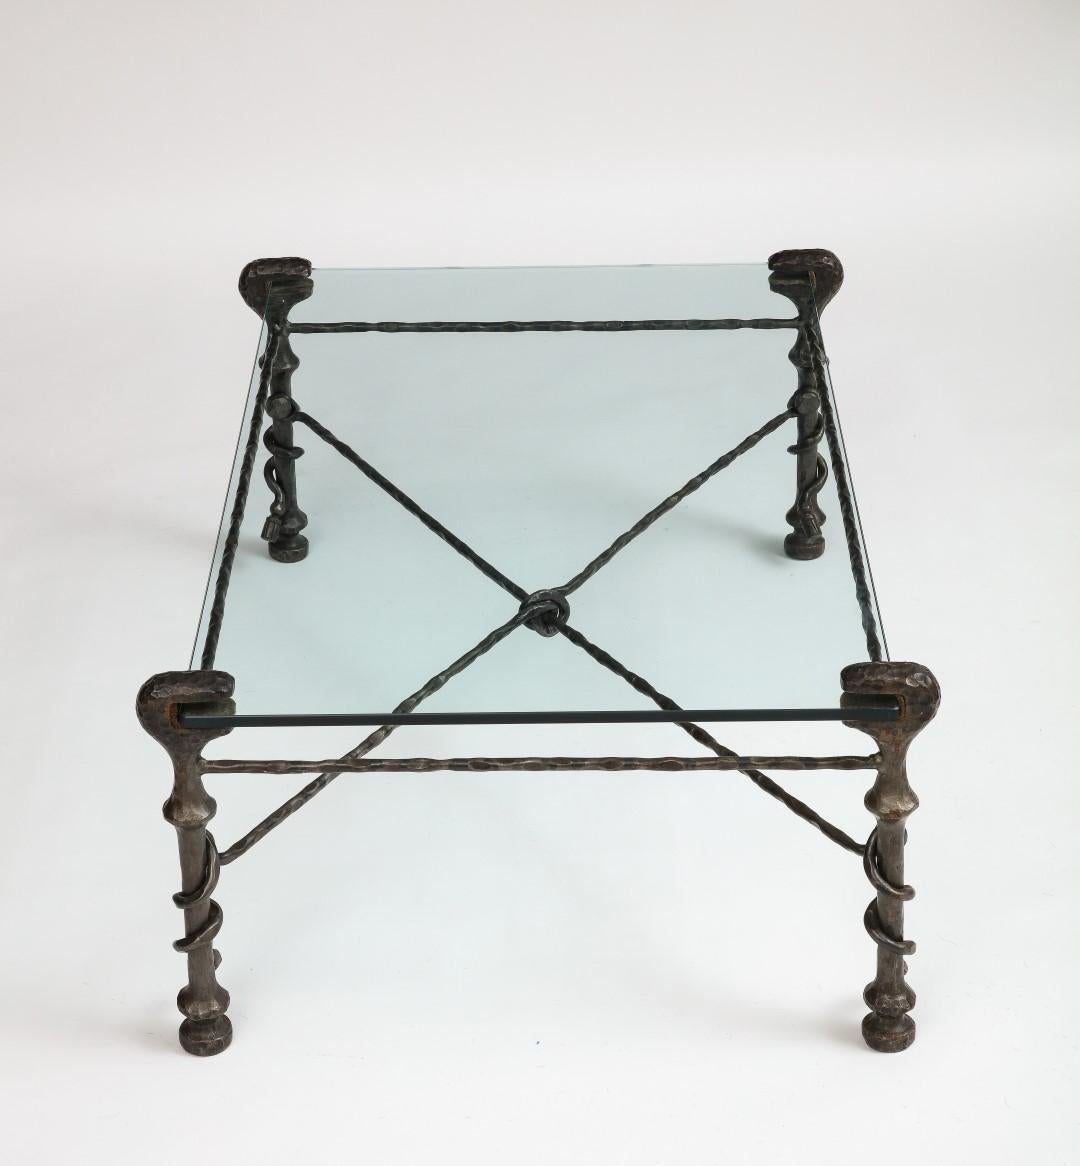 Midcentury Italian Giacometti-Style Bronze Coffee Table with Glass Top, c. 1950 3